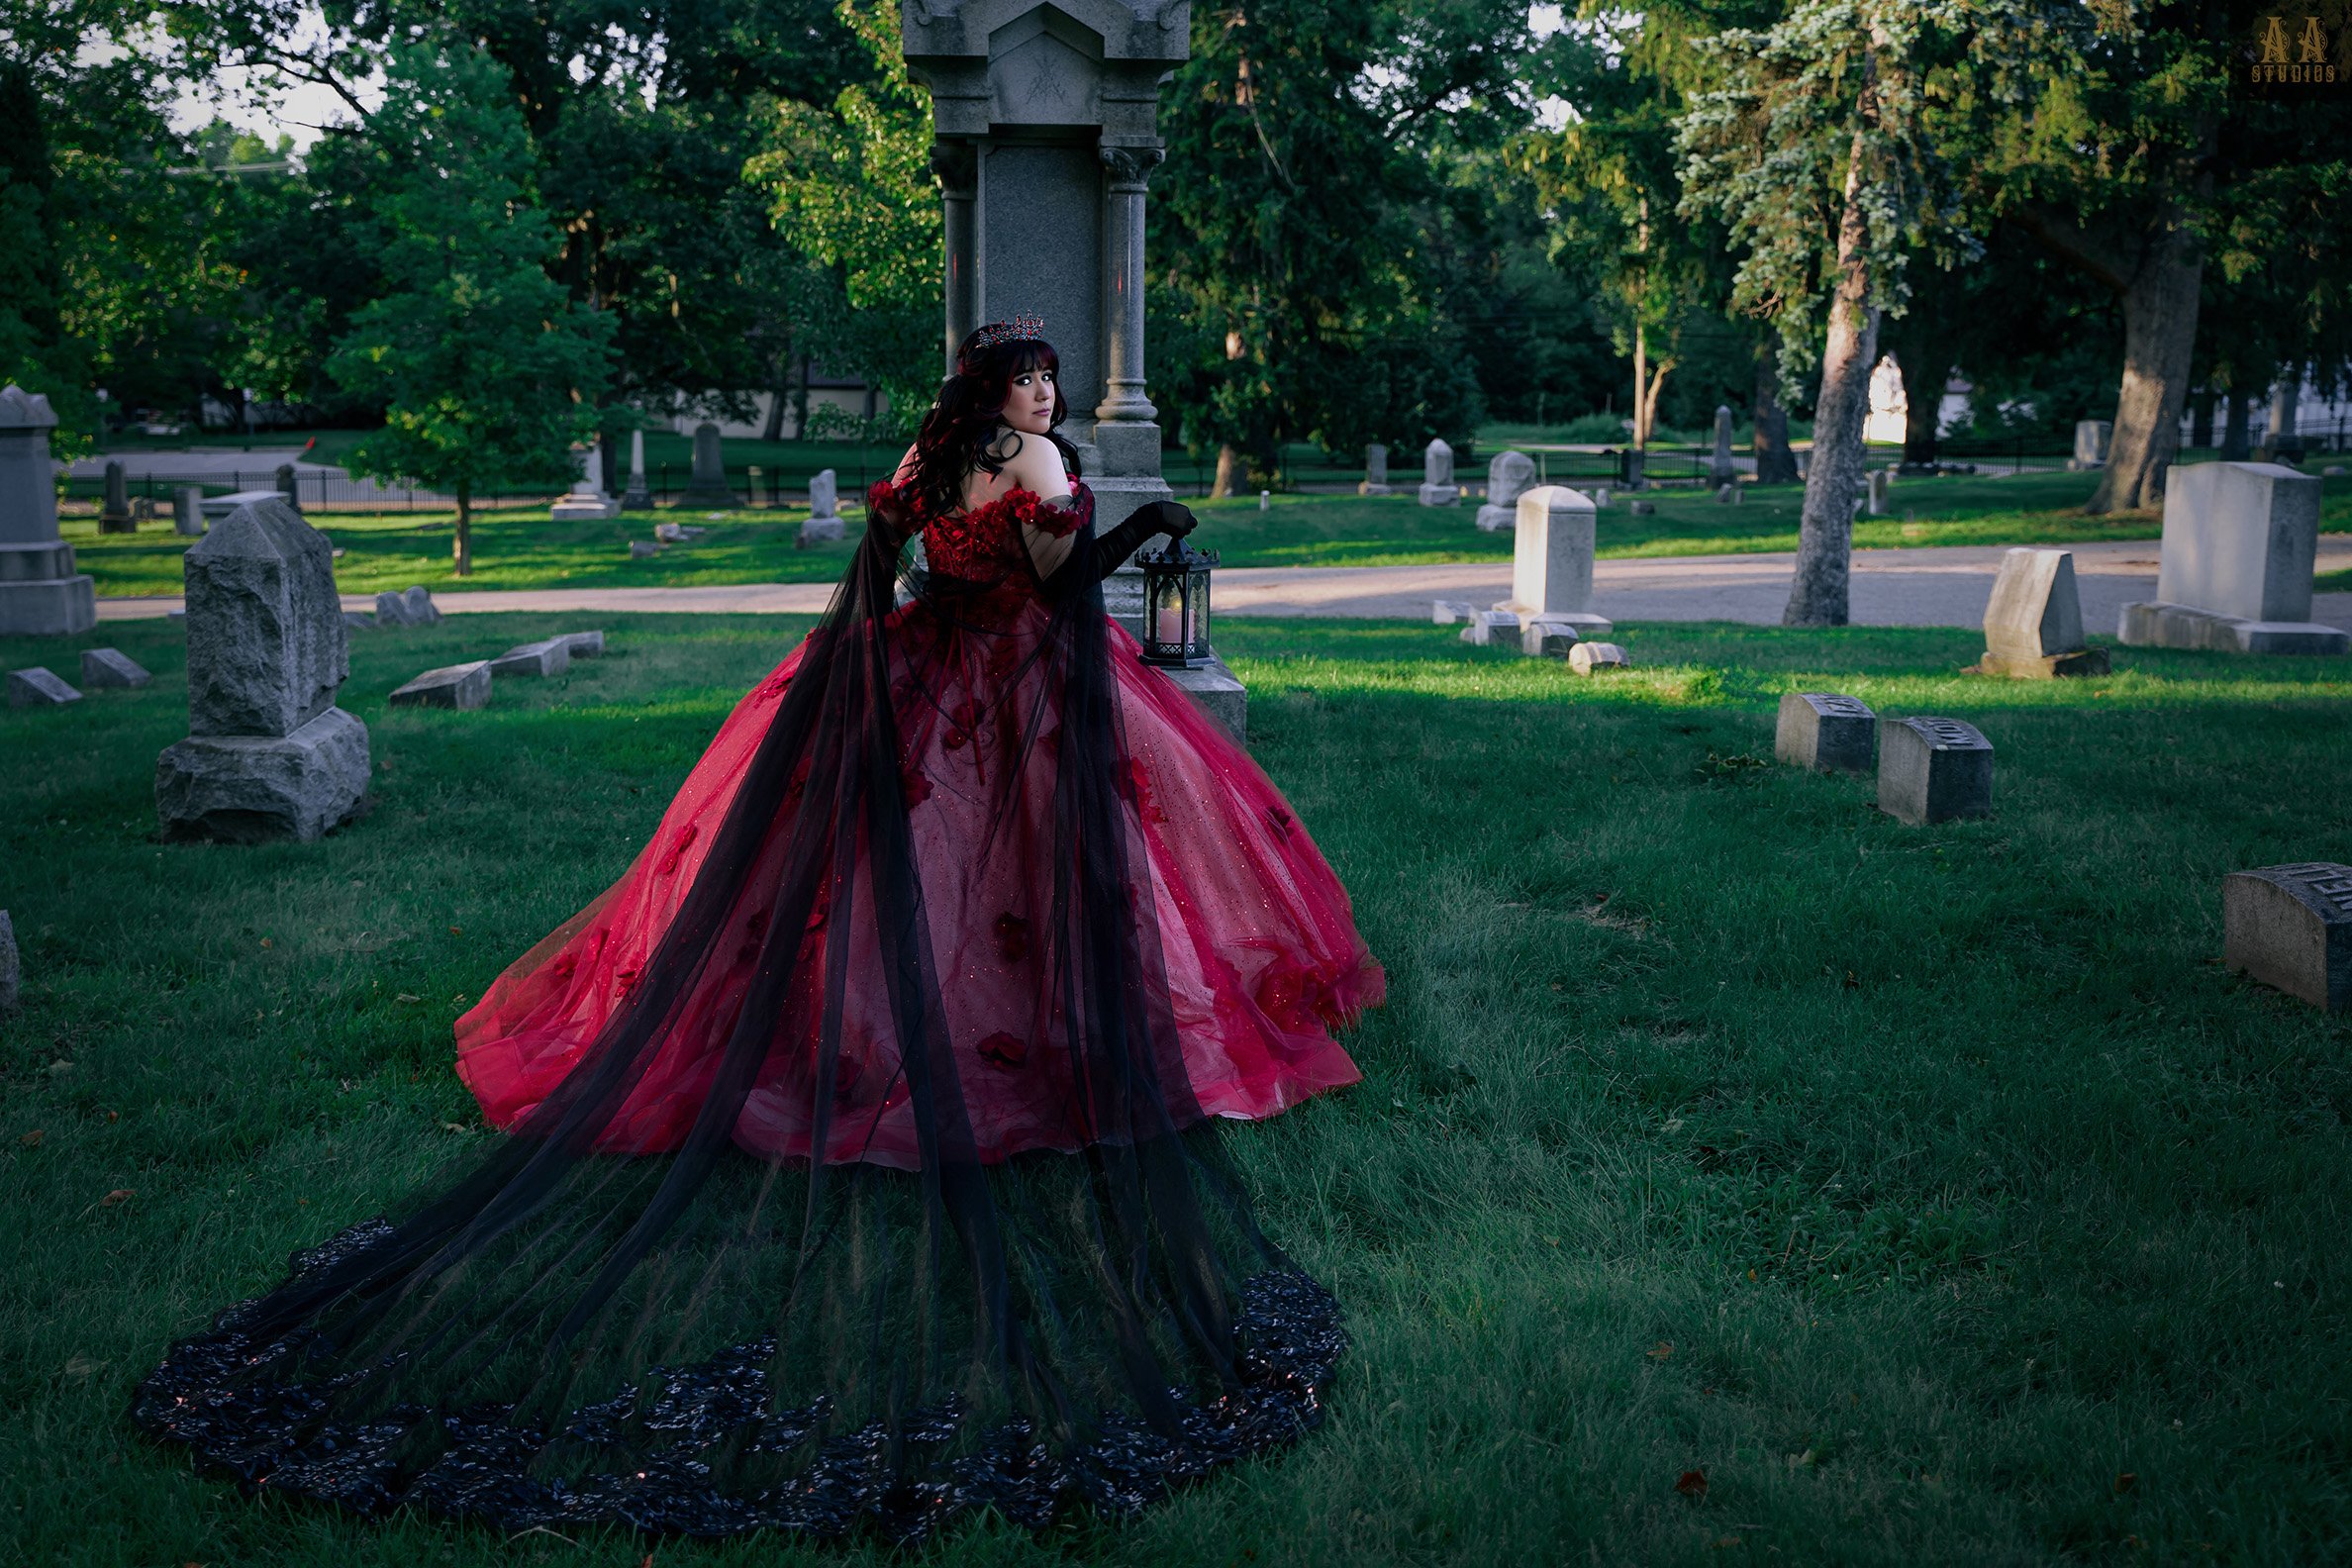 Spooky Cemetery Quinceanera Photo session in Michigan